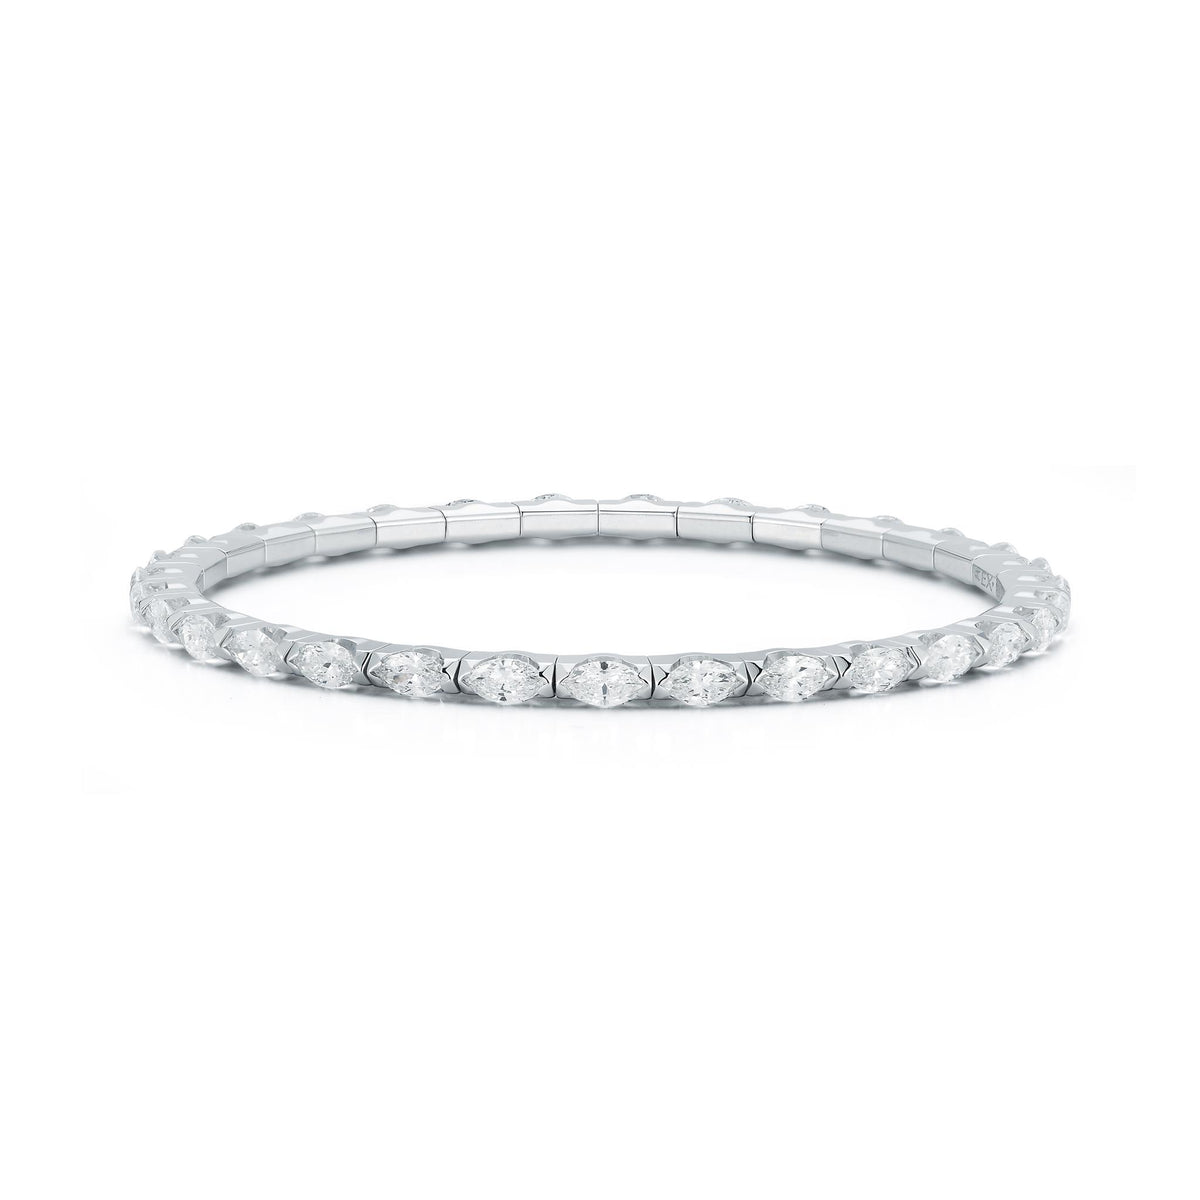 18Kt White Gold Extensible Bangle Bracelet with 3.00cttw Marquise Natural Diamonds